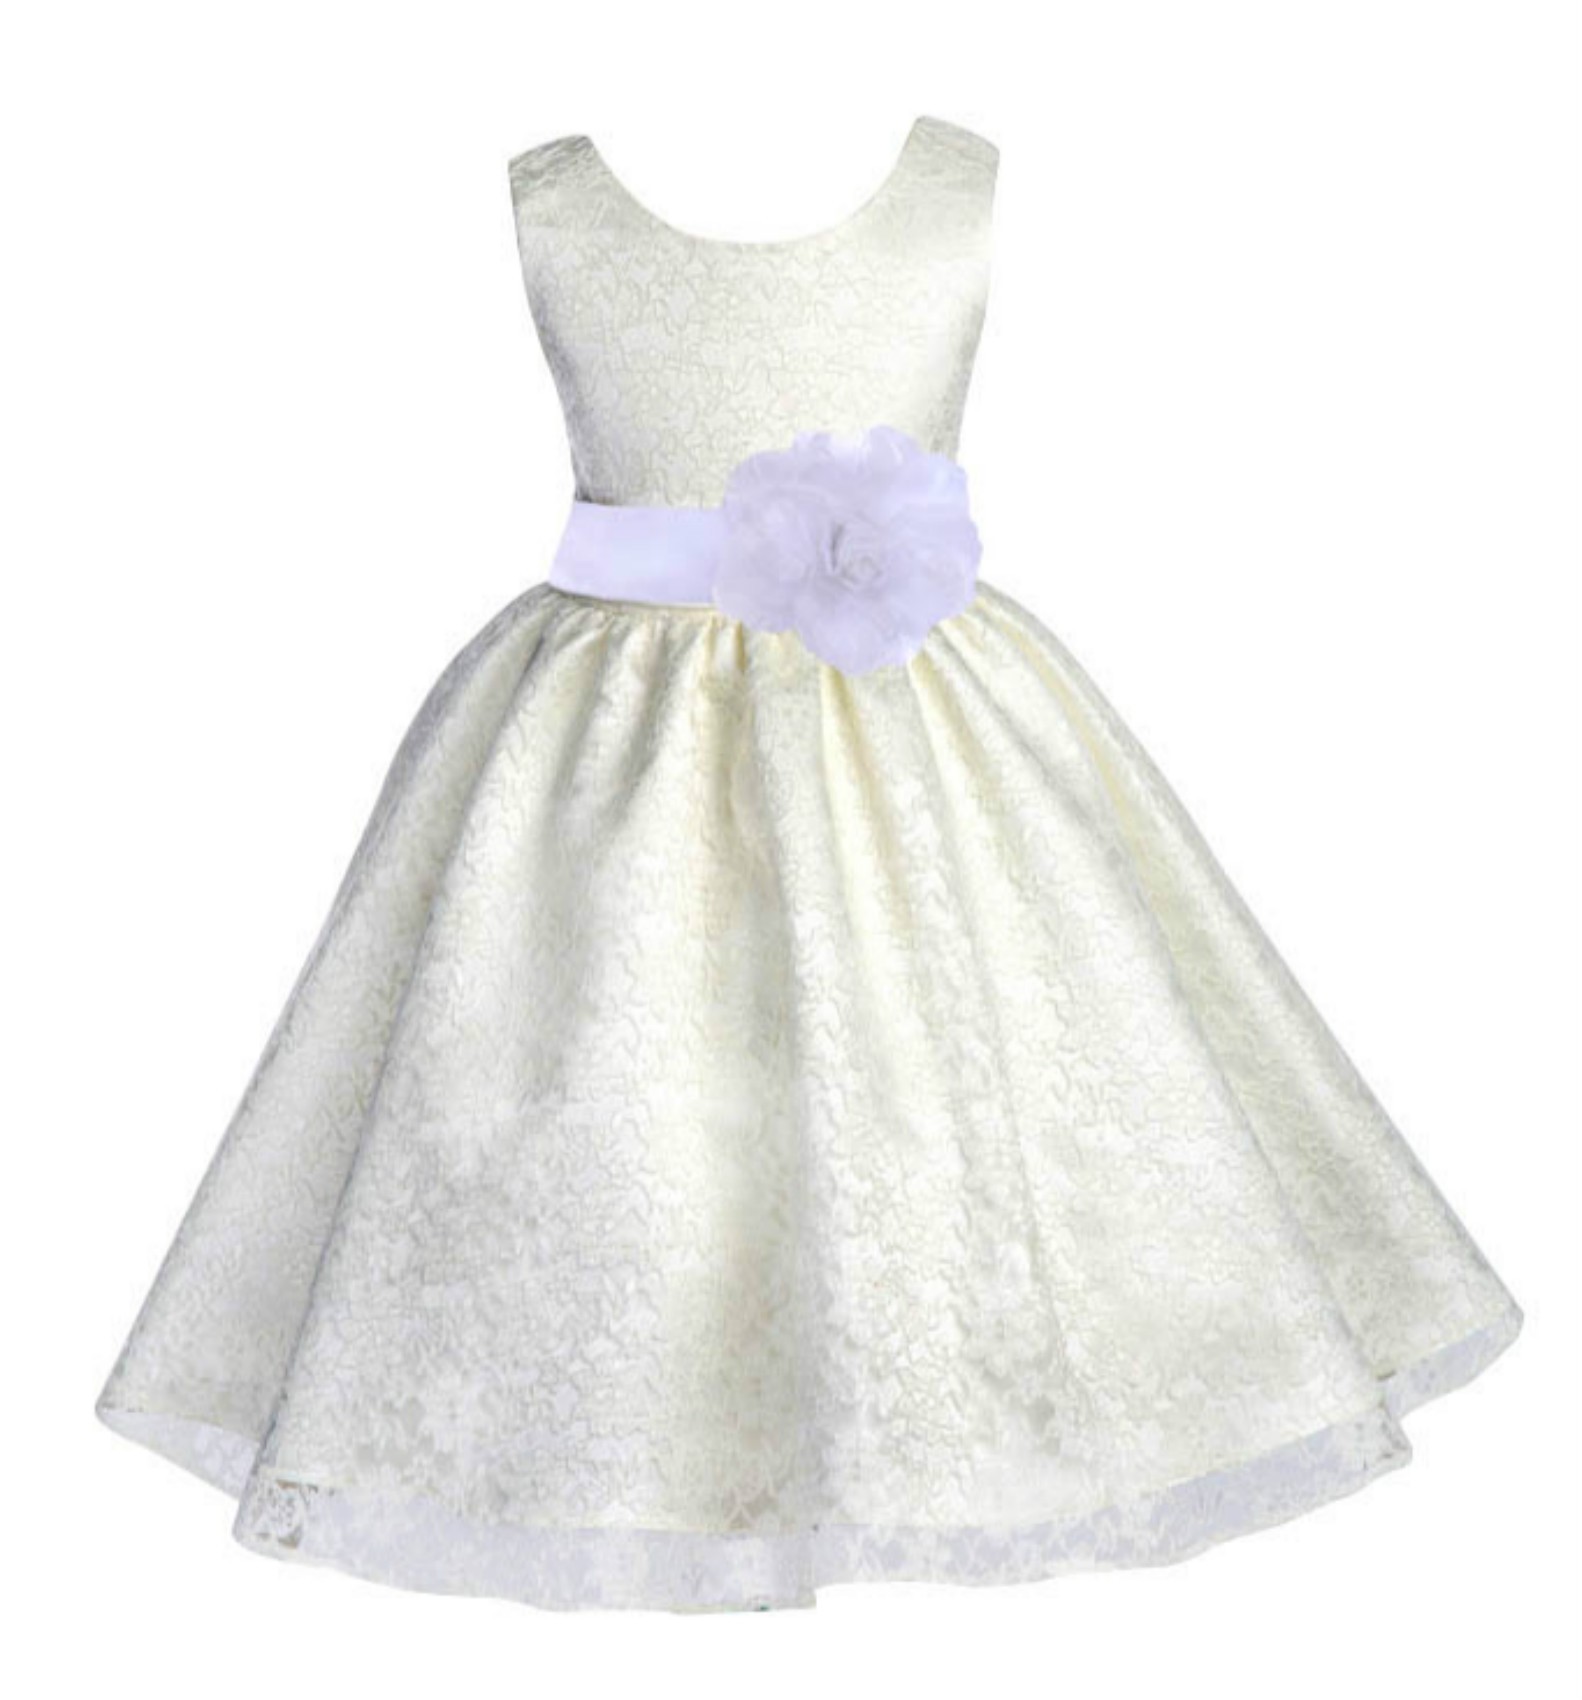 Ivory/White Floral Lace Overlay Flower Girl Dress Special Event 163S